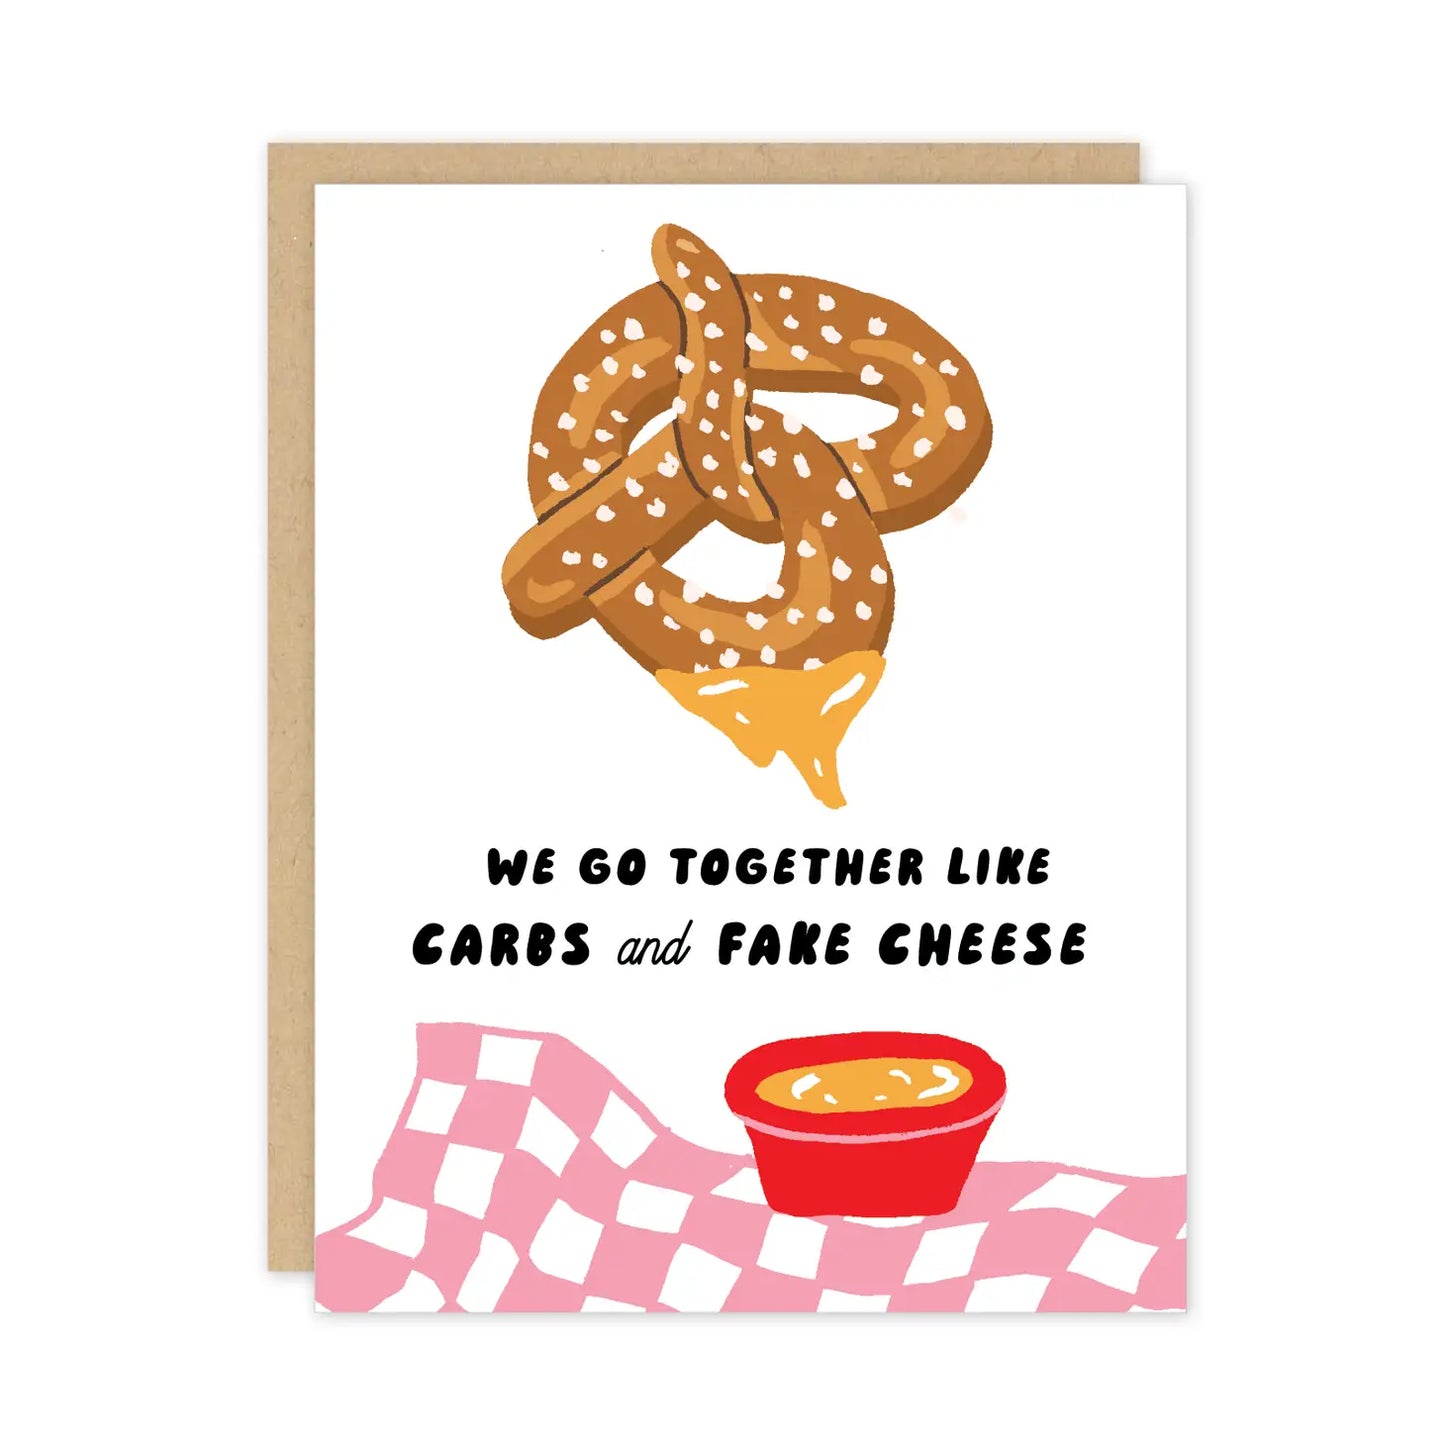 Love-friendship-greeting card -- has an image of a pretzel and cheese for dipping. It reads "We go together like carbs and fake cheese" 